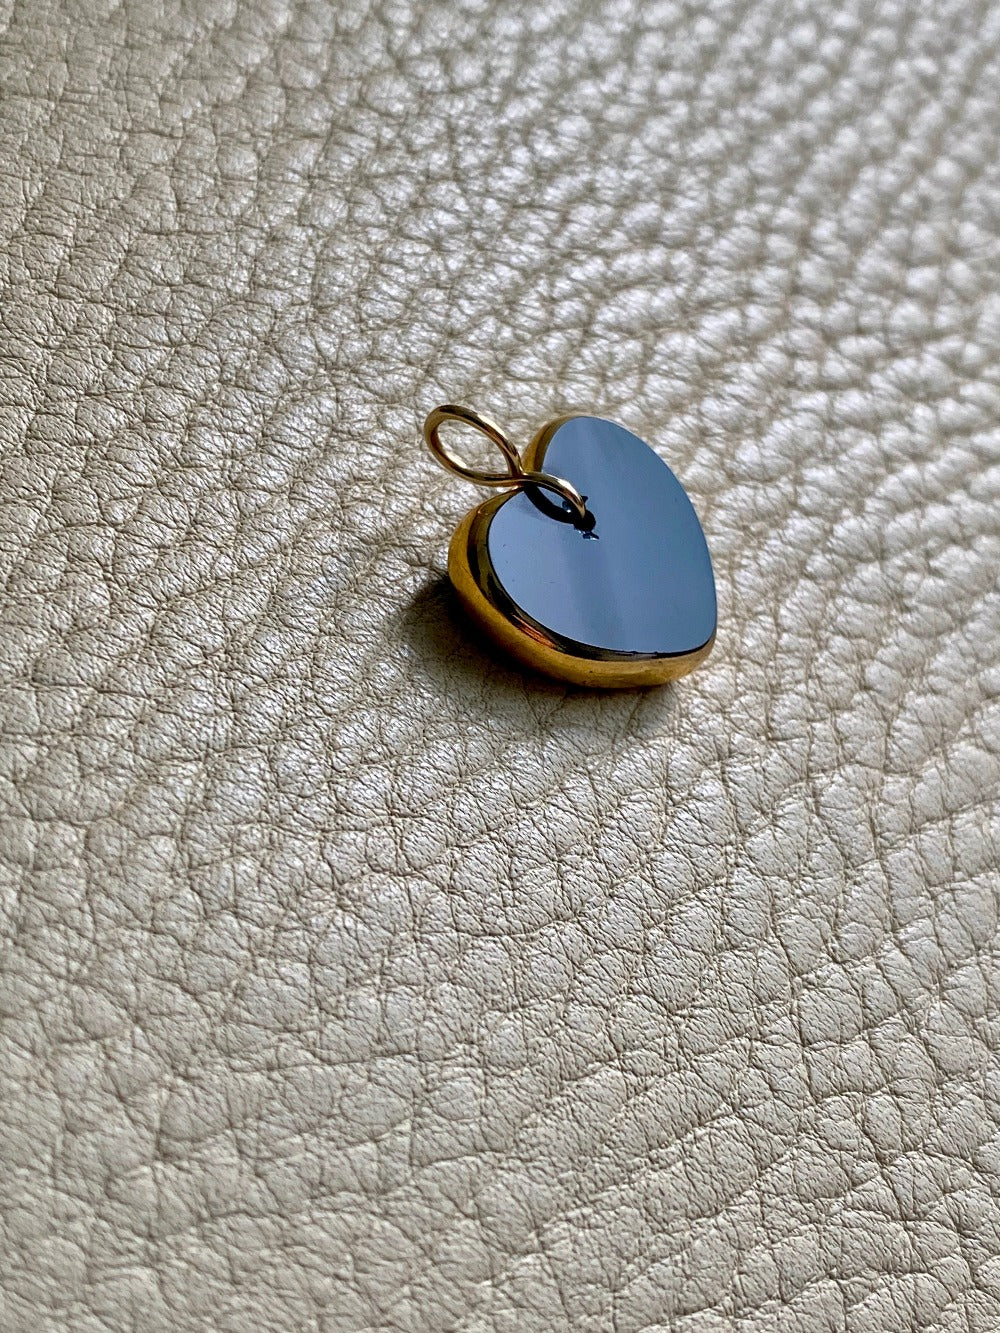 Black Heart with 24k gold edge - German vintage charm or pendant - Limited edition